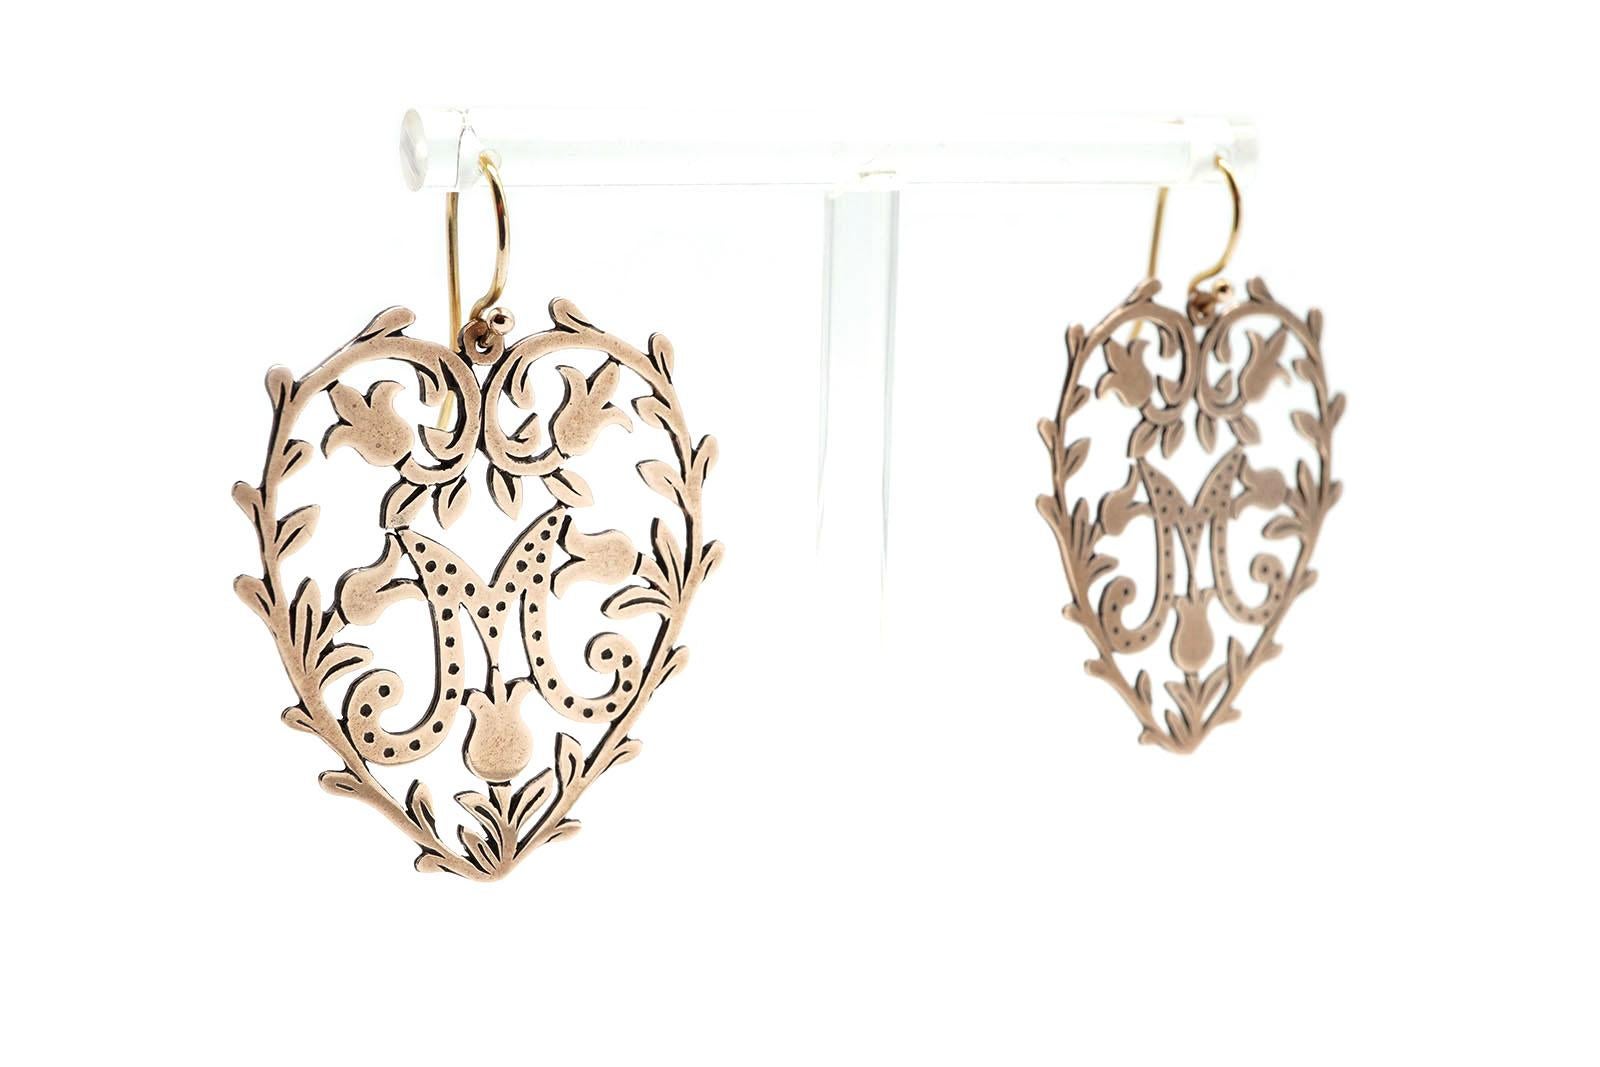 Earrings forged with rue leaves heart shaped decoration enclosing the M monogram.
These sophisticated and delicate earrings represent the fusion of the sacred with the profane by the use of the Marian symbol and the Rue leaves considered by the